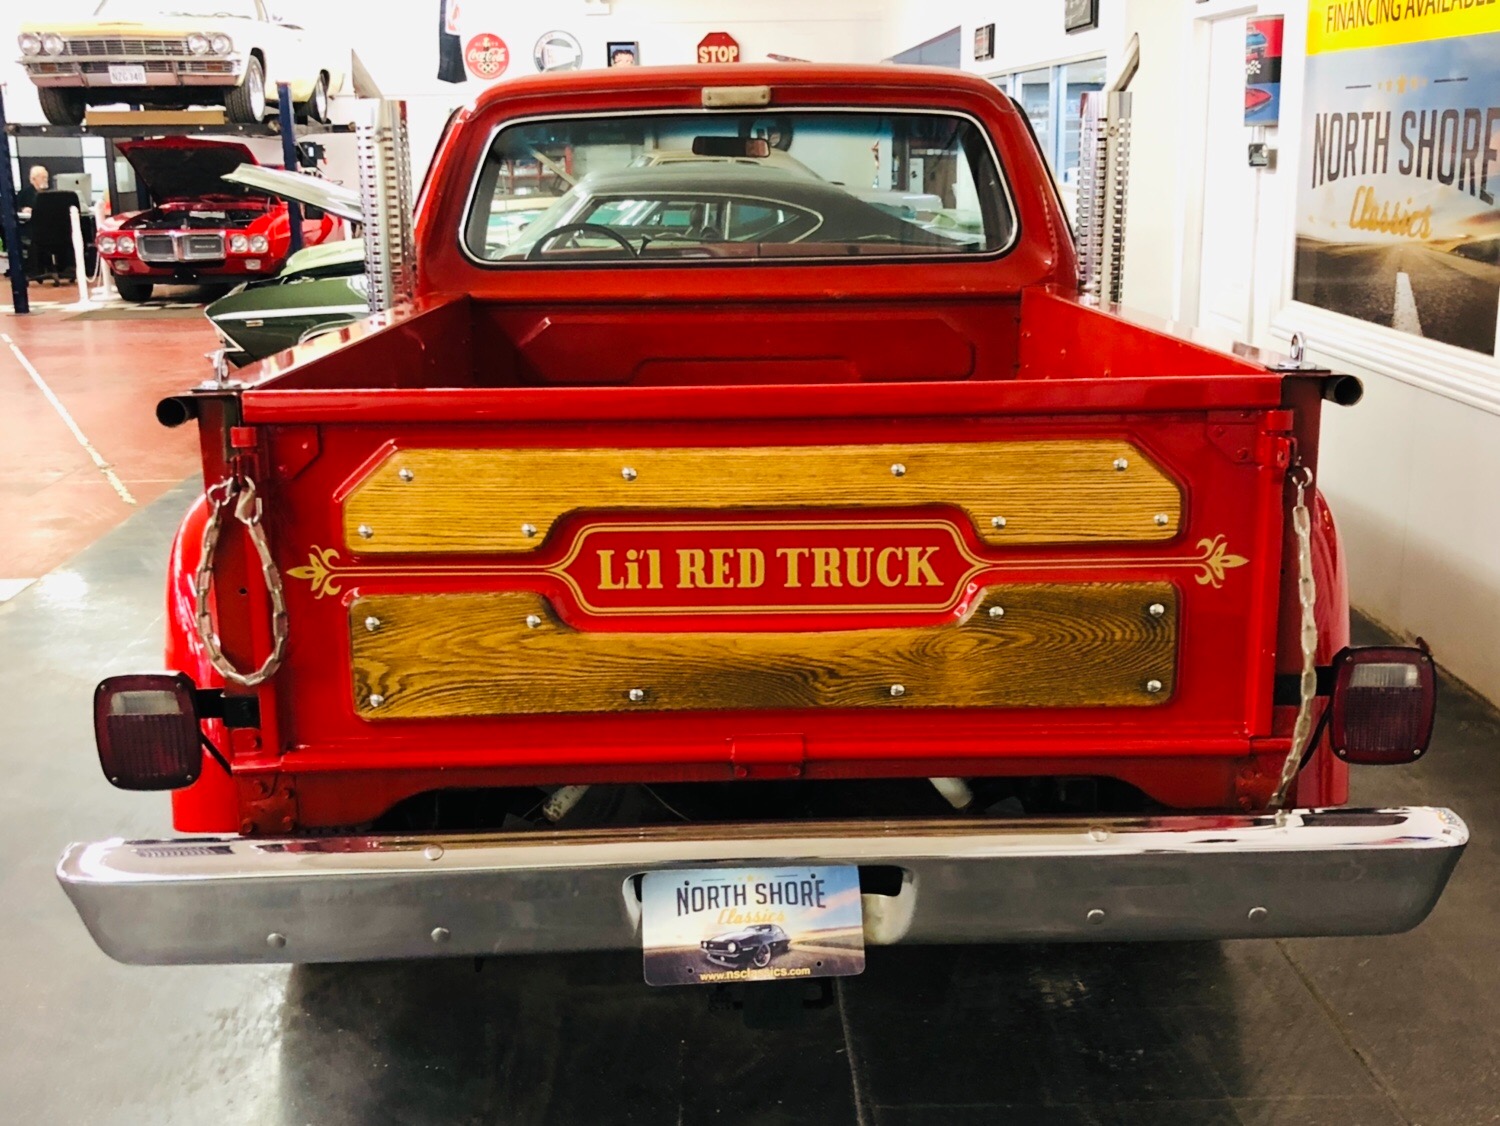 1979 Dodge Pickup Real Deal Lil Red Express Power Wagon See Video